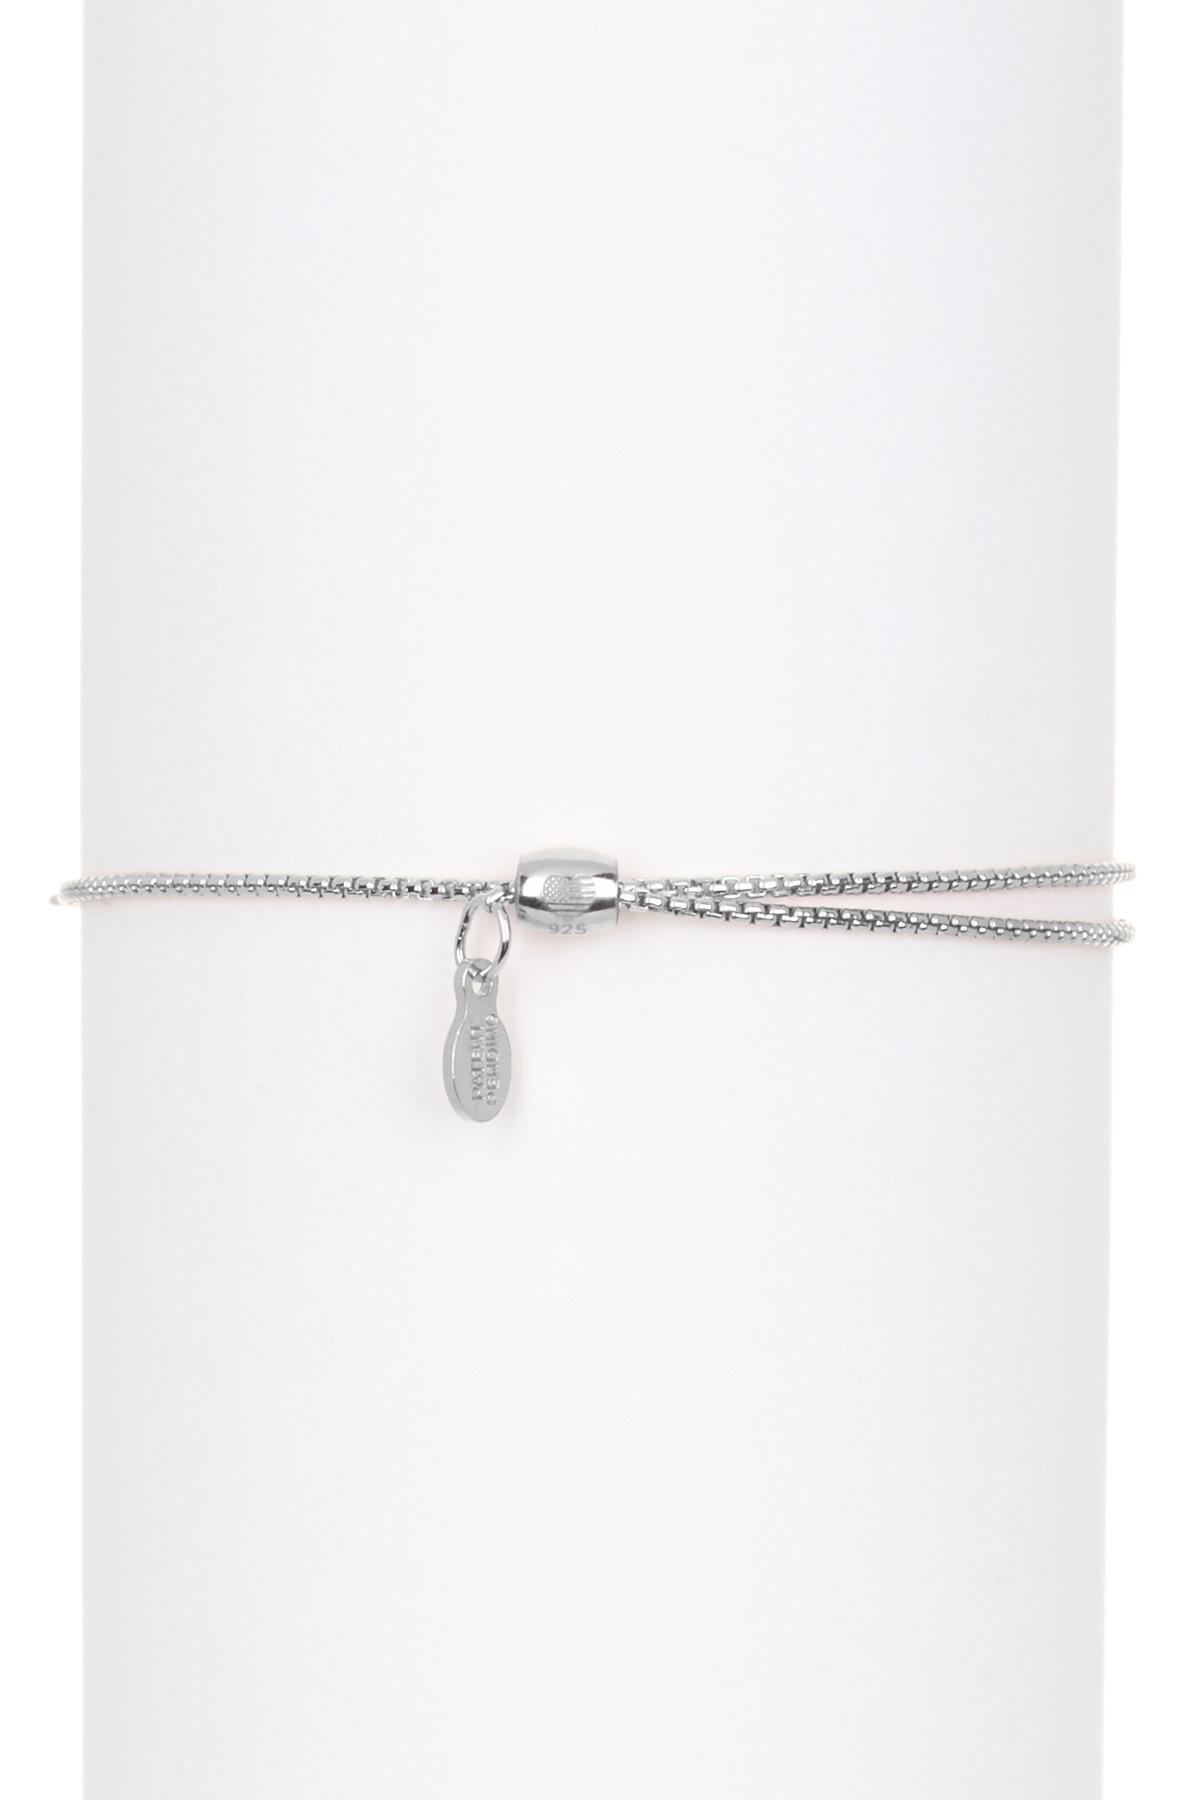 ALEX AND ANI Sterling Silver Wing Station Pull Chain Bracelet in Metallic |  Lyst